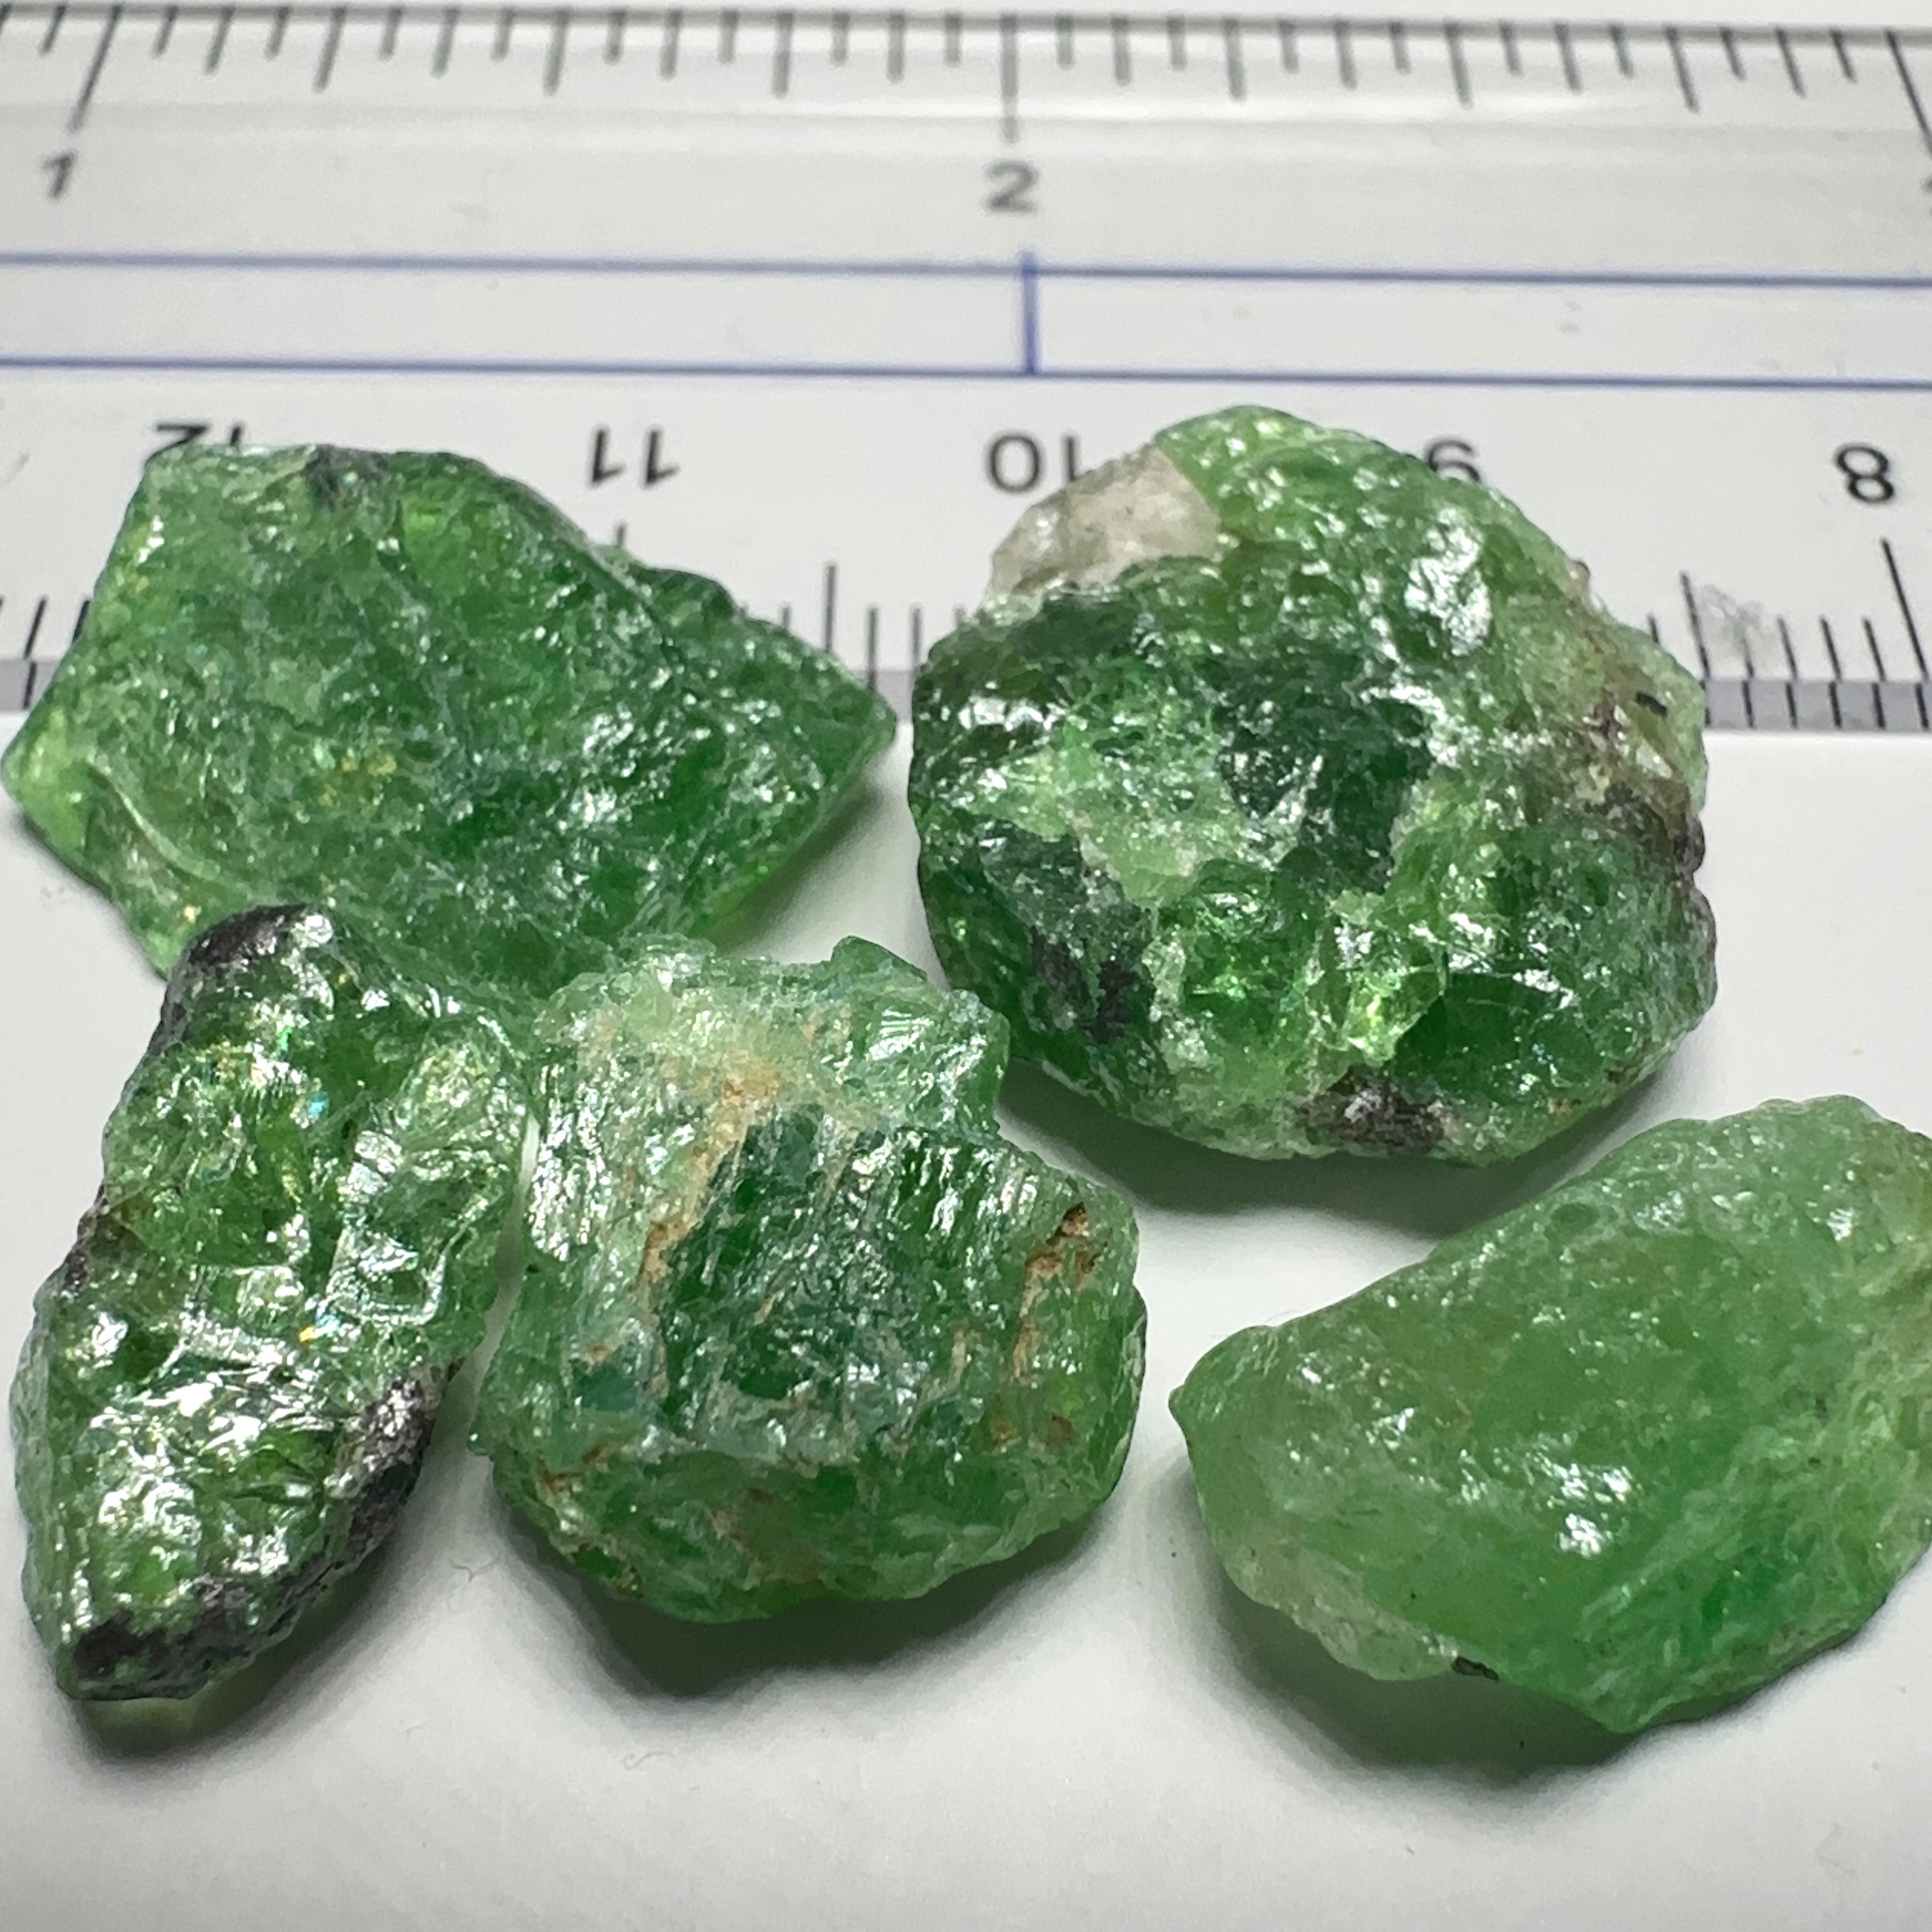 47.28ct Tsavorite Garnet Lot, Tanzania. Untreated Unheated. 5.37ct - 14.51ct. All included, slightly transparent, good for setting in jewellery as is or as specimens to add to a collection